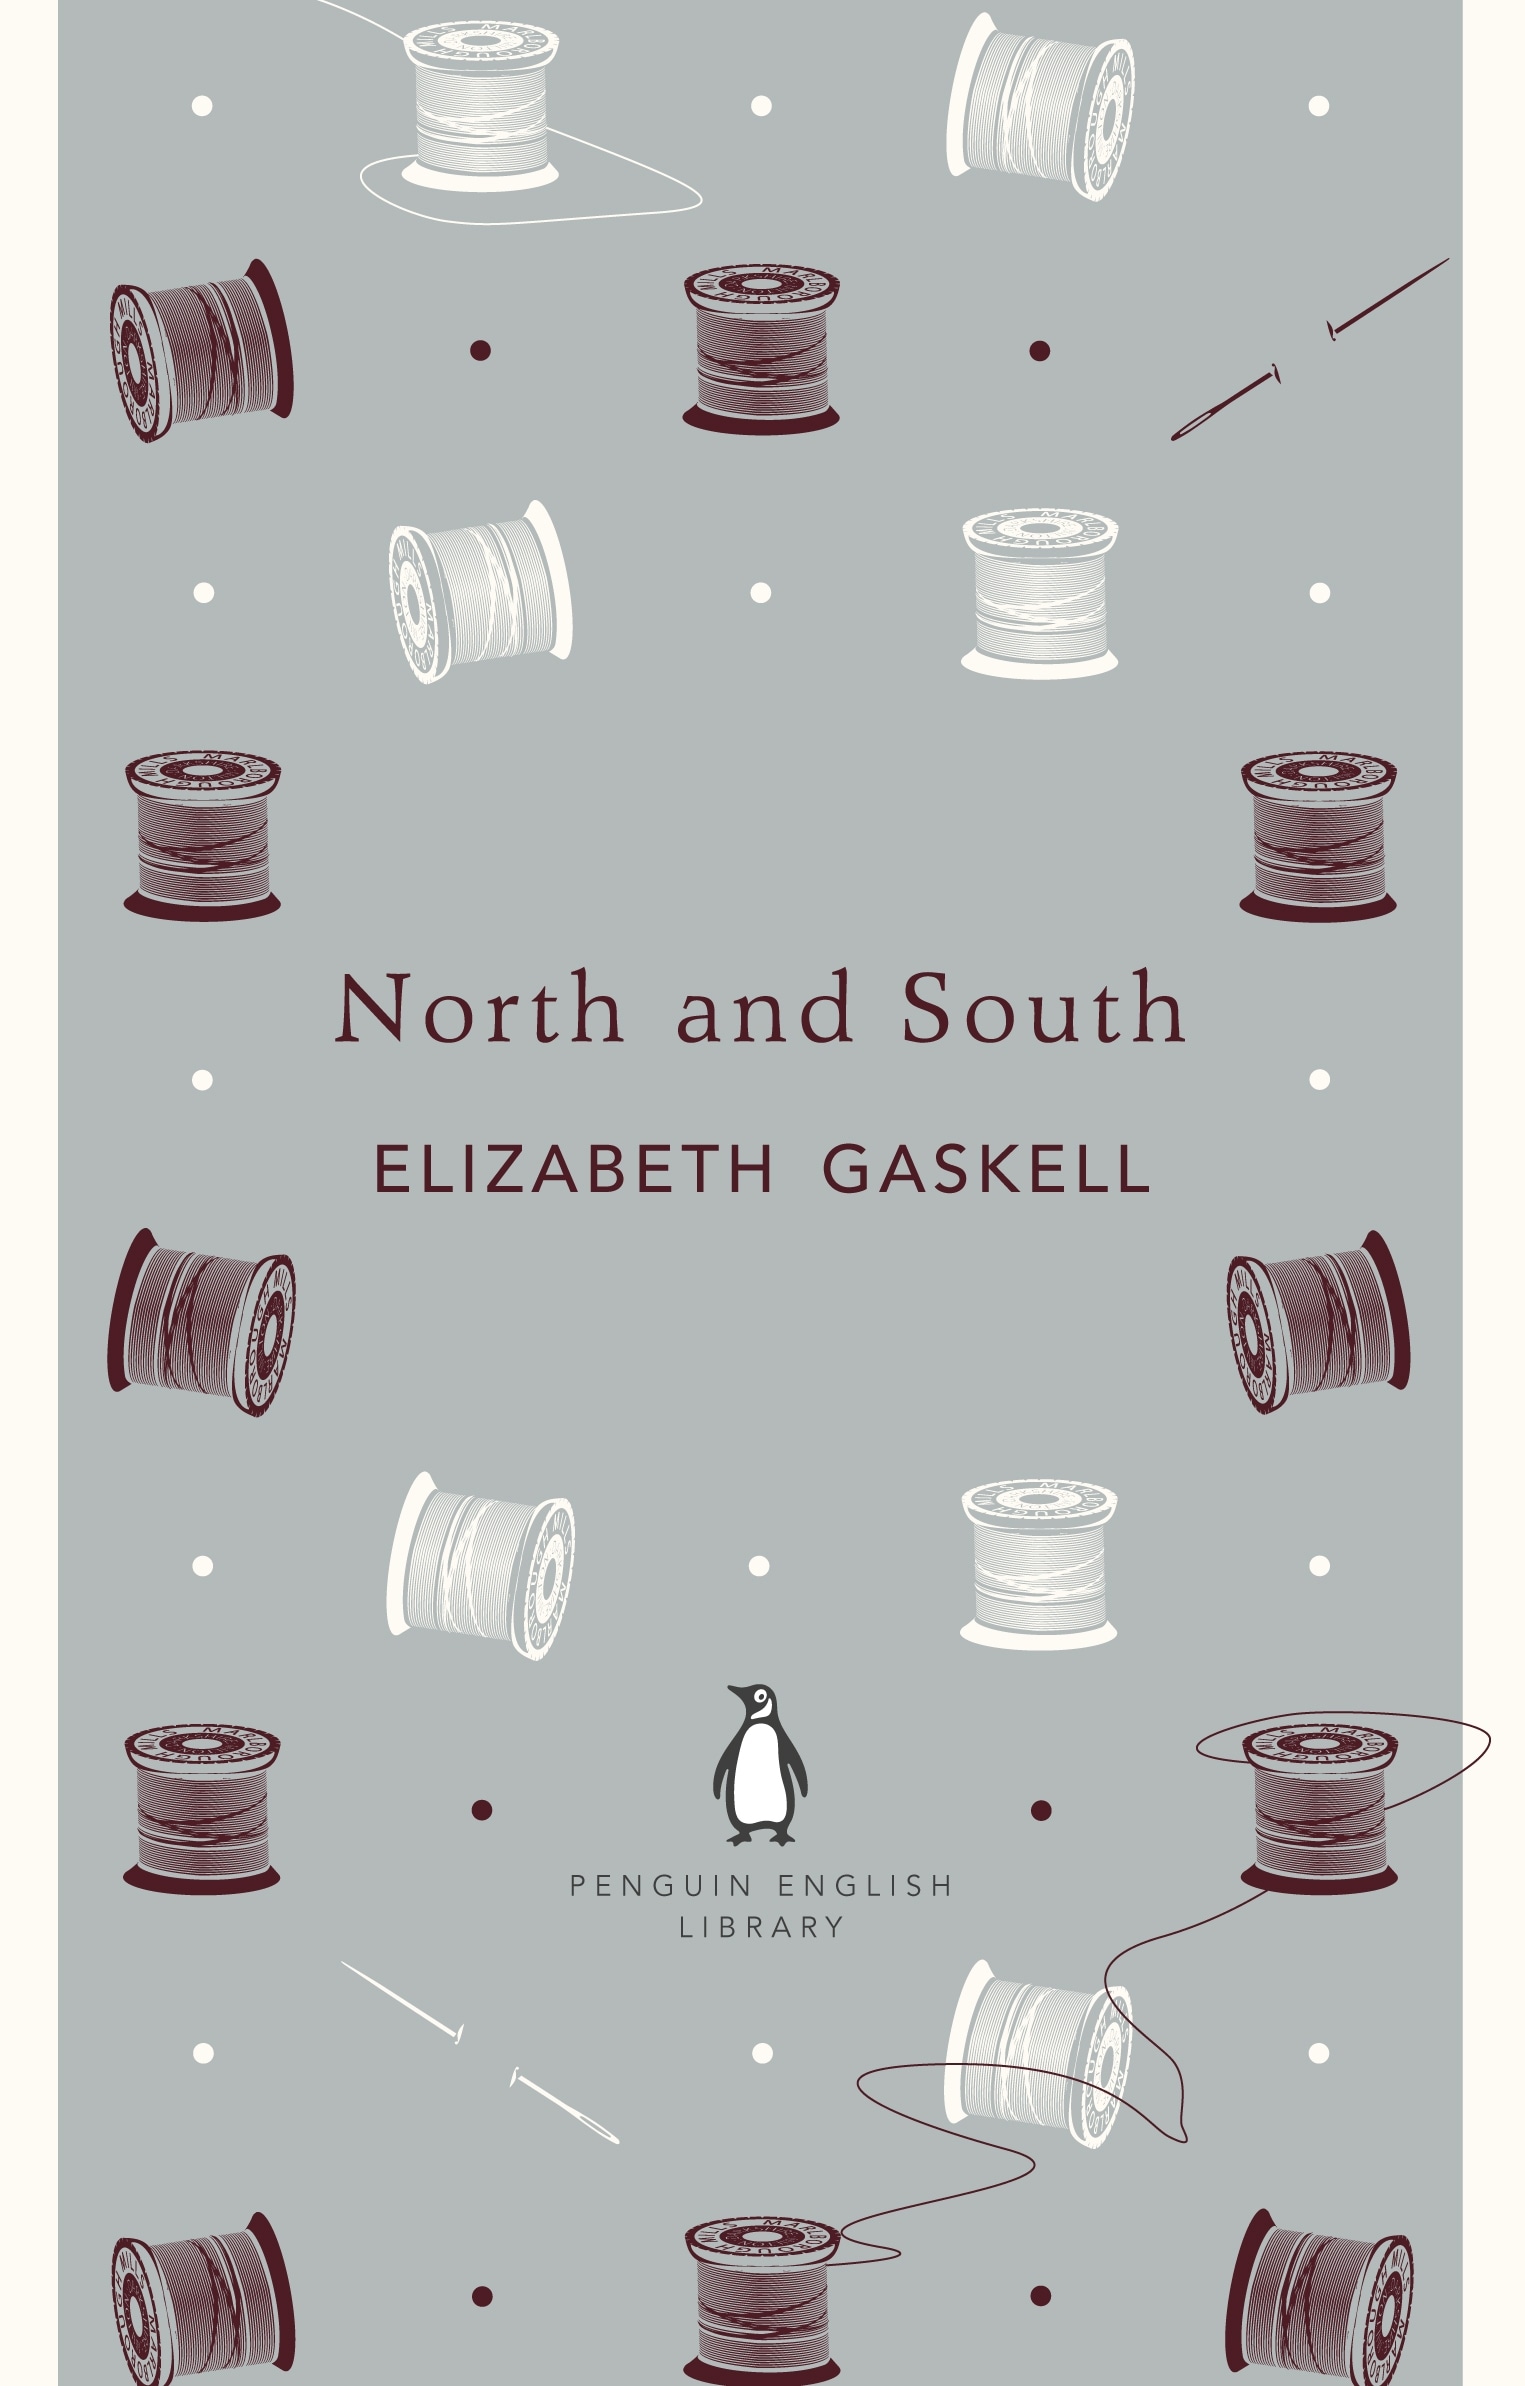 Book “North and South” by Elizabeth Gaskell — April 26, 2012